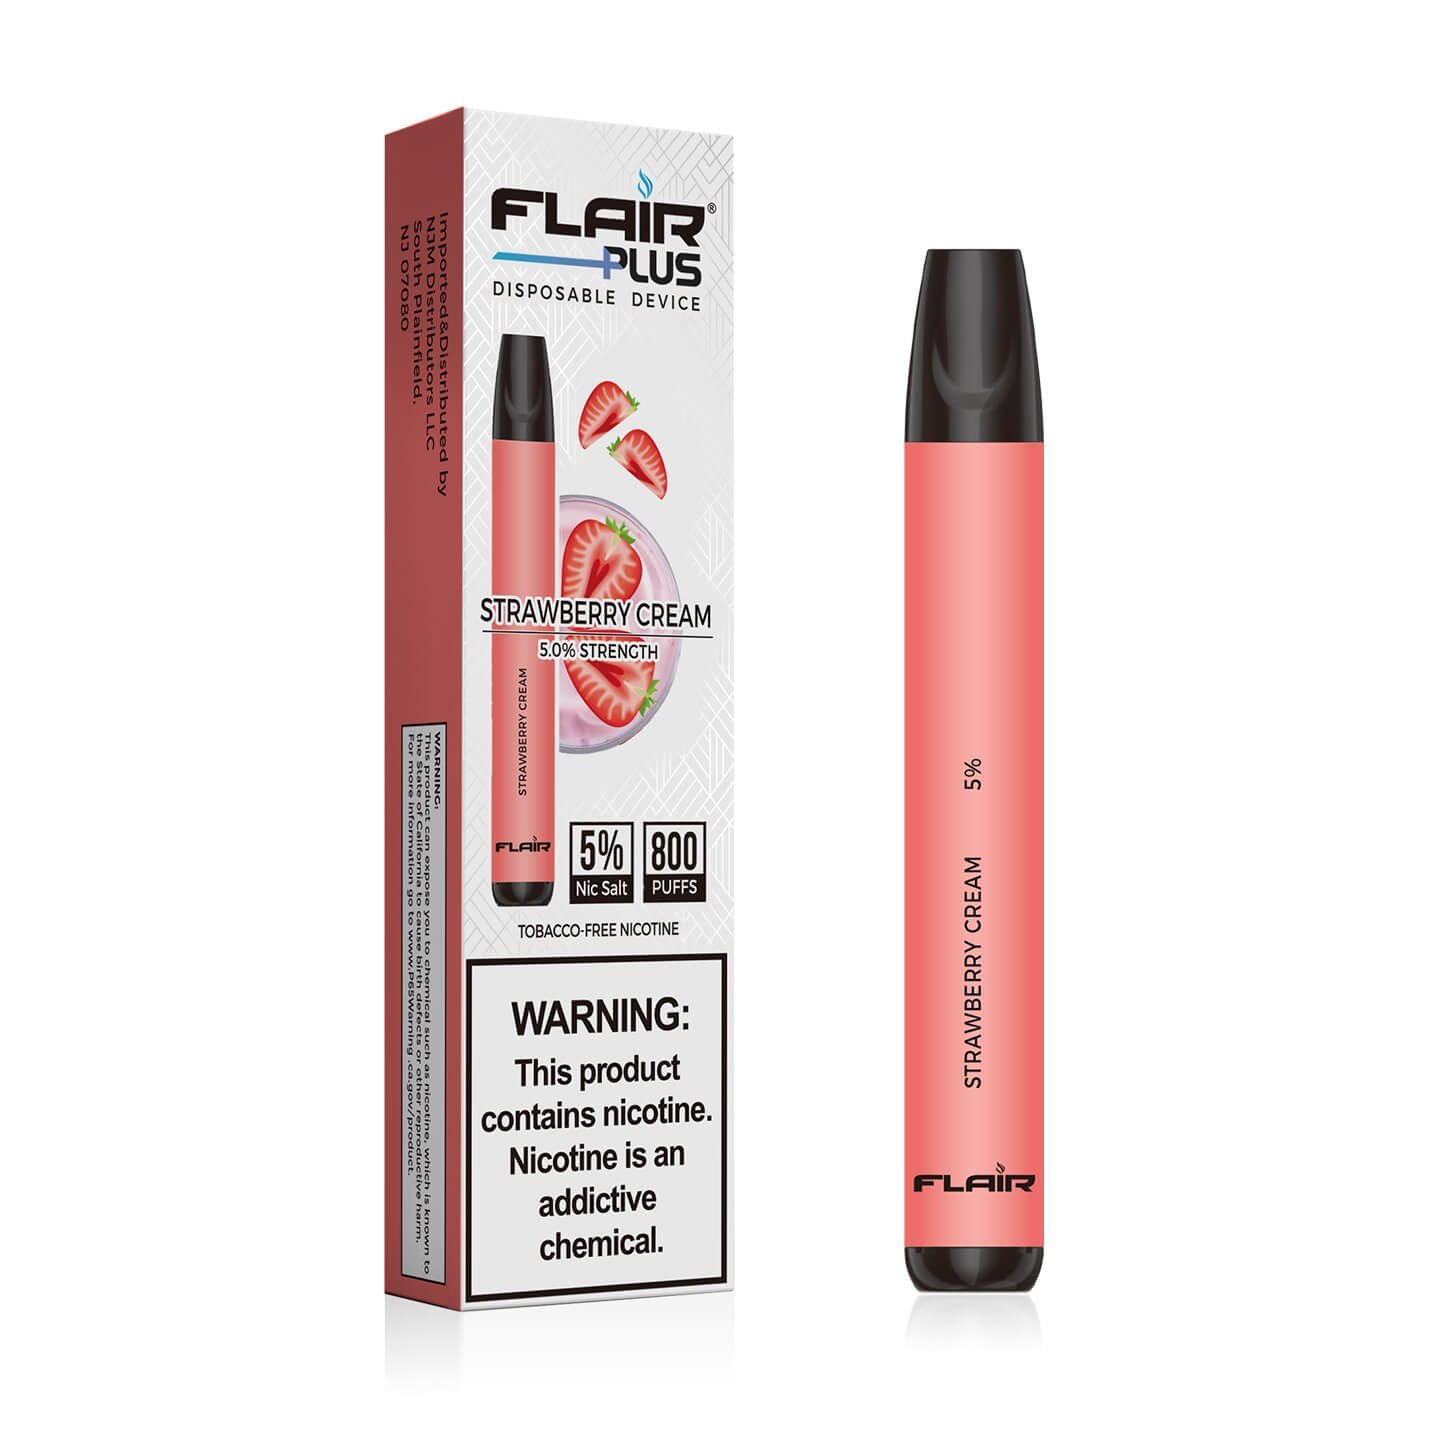 Flair Plus Disposable Devices (Strawberry Cream - 800 Puffs)